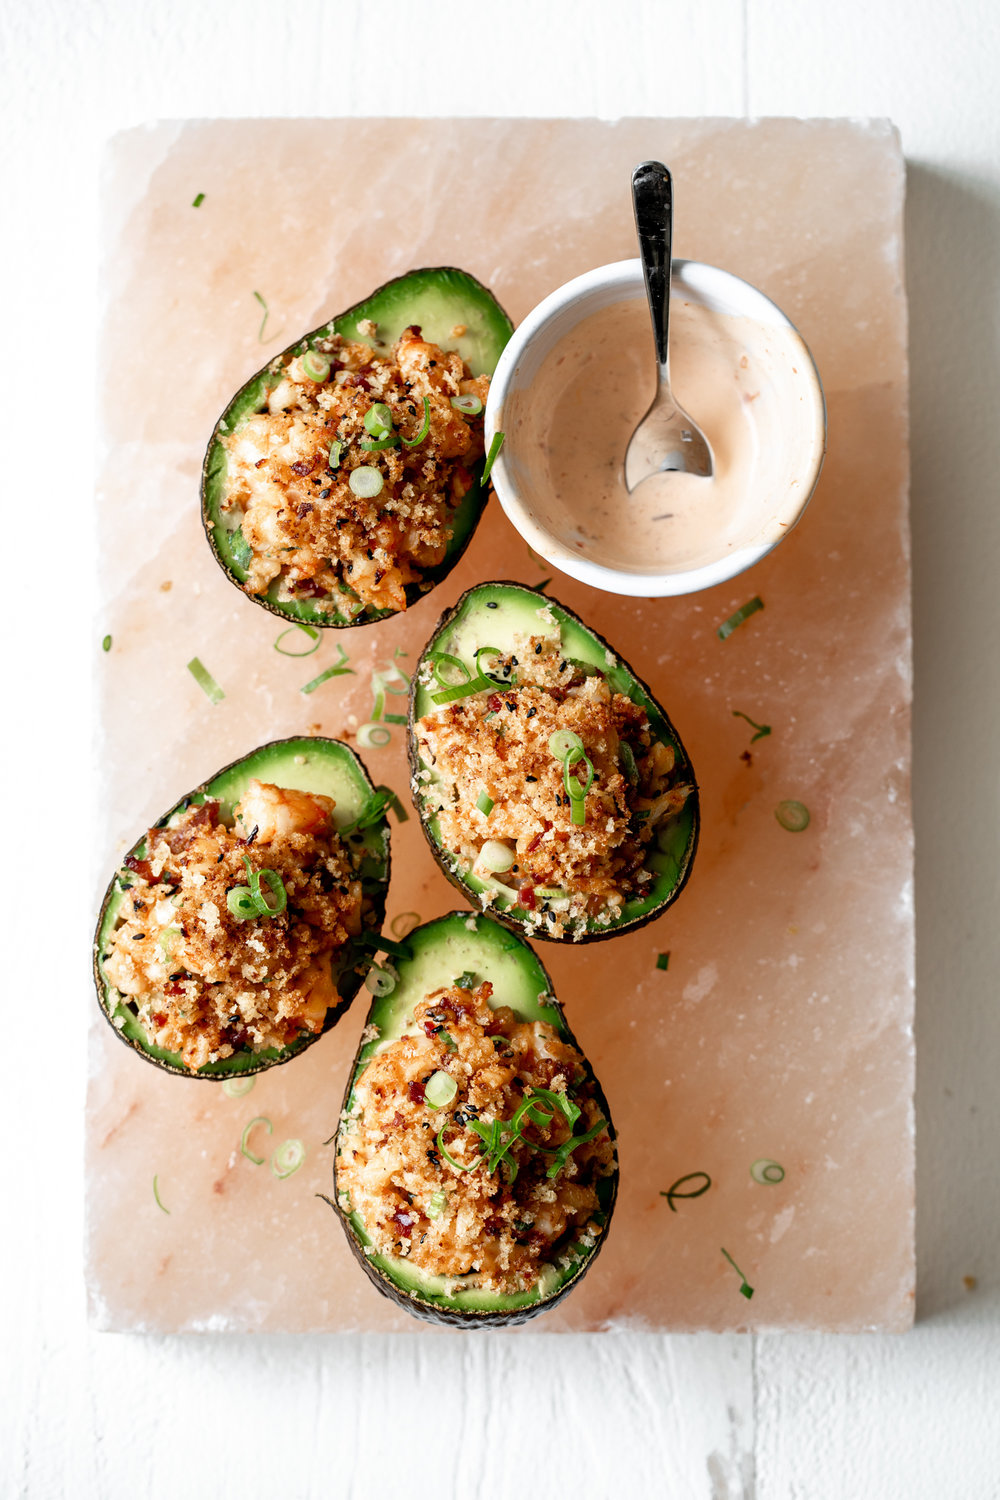 Spicy Shrimp-Salad Stuffed Baked Avocados